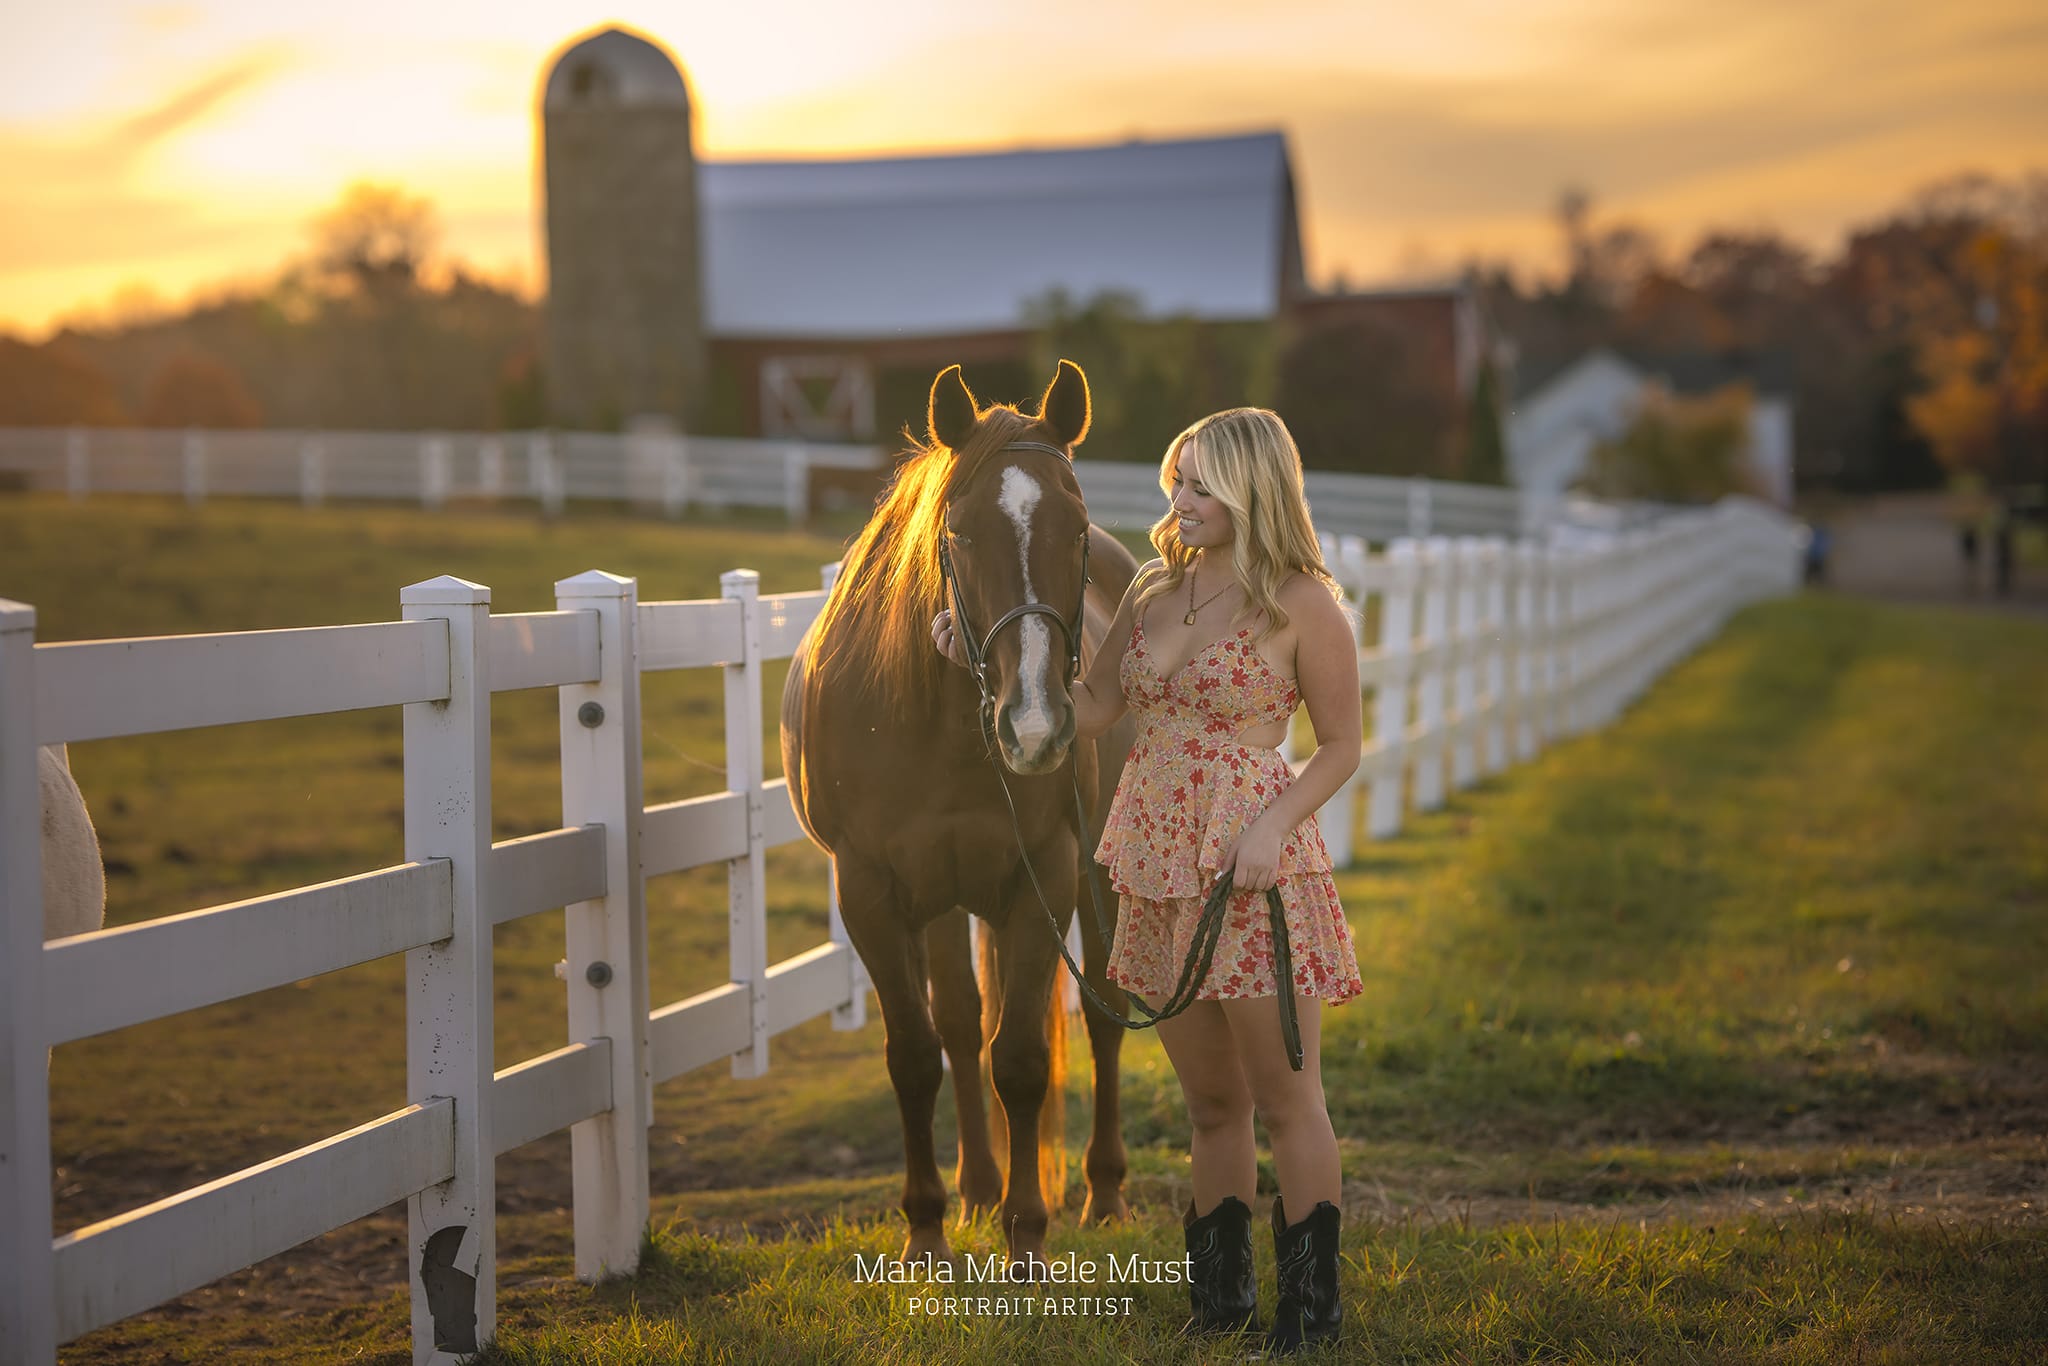 A captivating equine moment captured by a Detroit photographer, featuring a woman standing alongside a horse during sunset, a red barn and fence in the background.